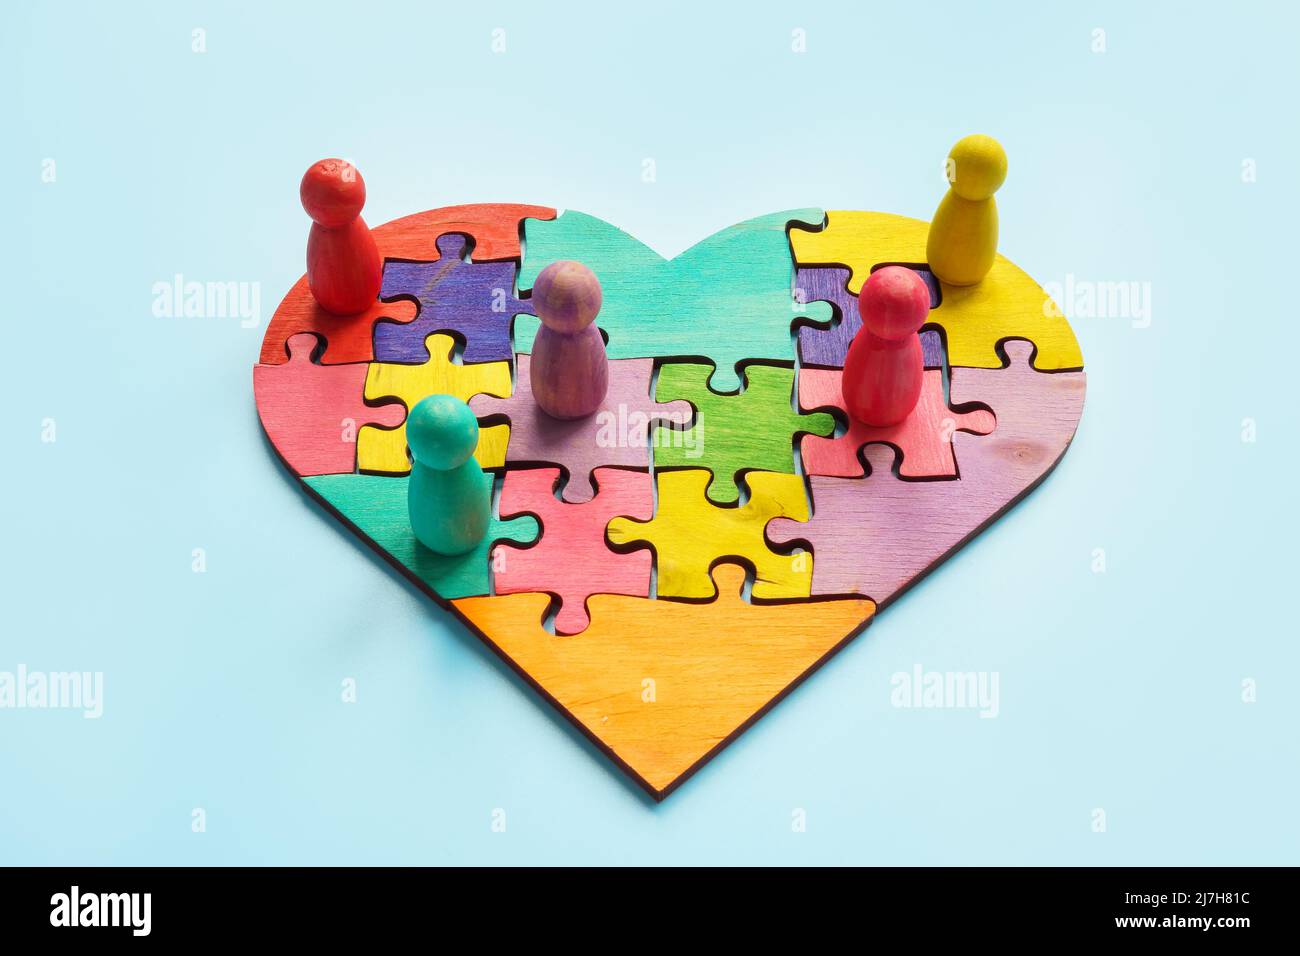 Togetherness and inclusion. Puzzle heart and colored figurines. Stock Photo